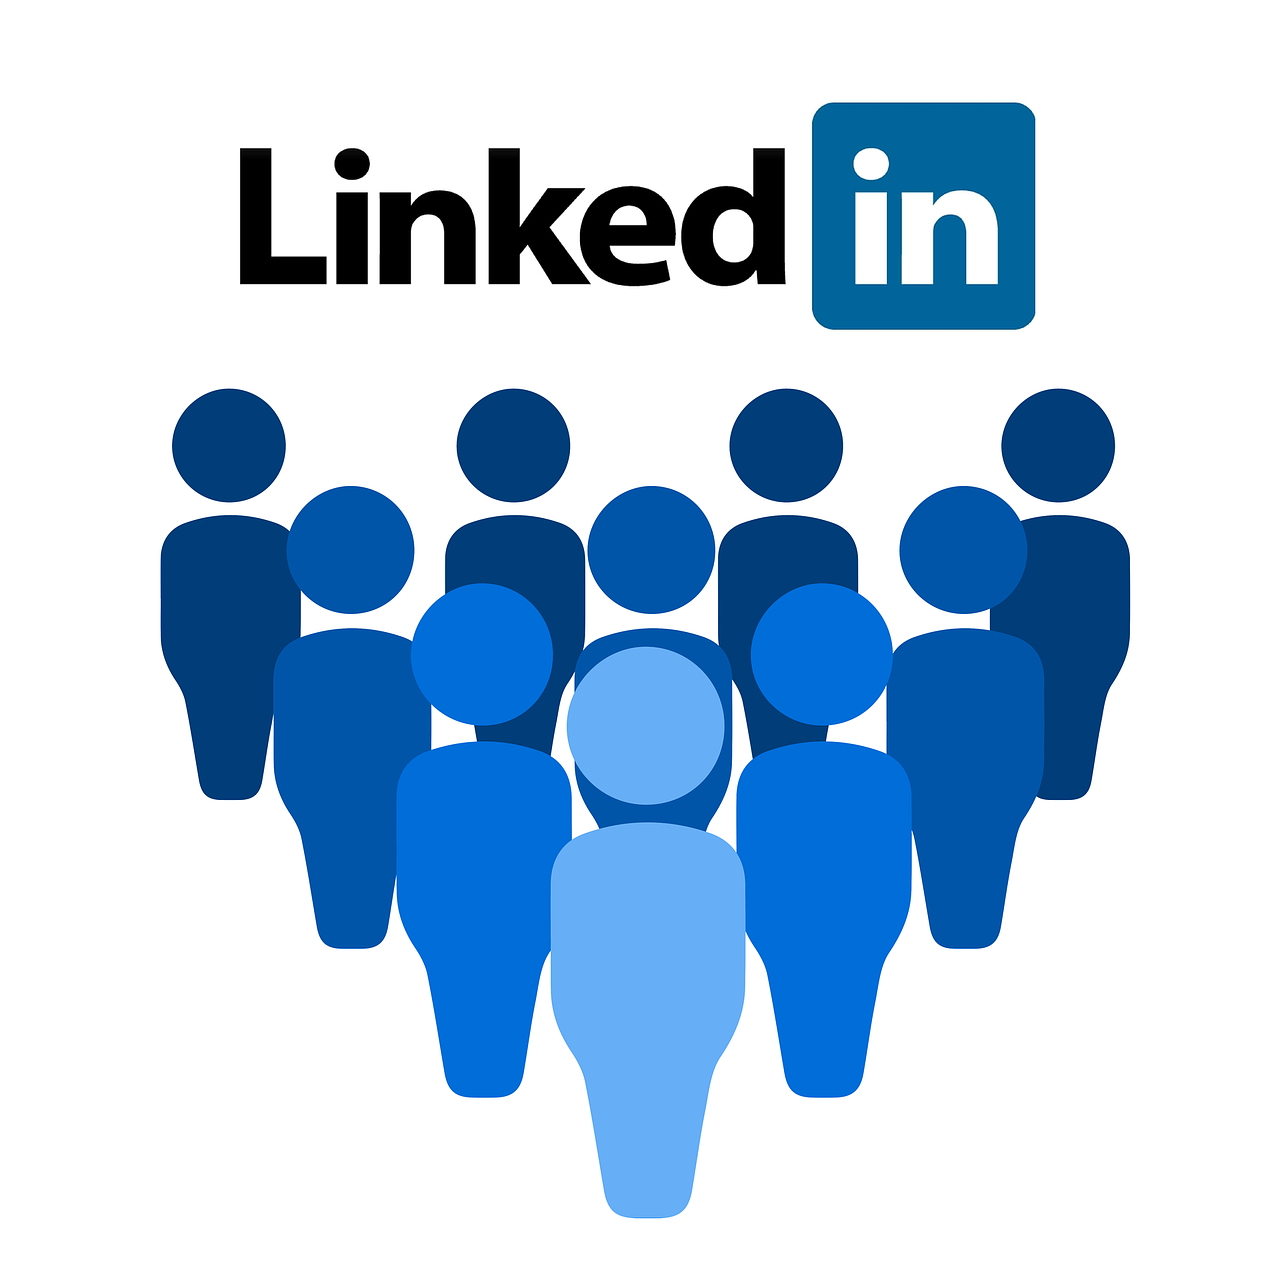 How Do You Become a Thought Leader on LinkedIn?